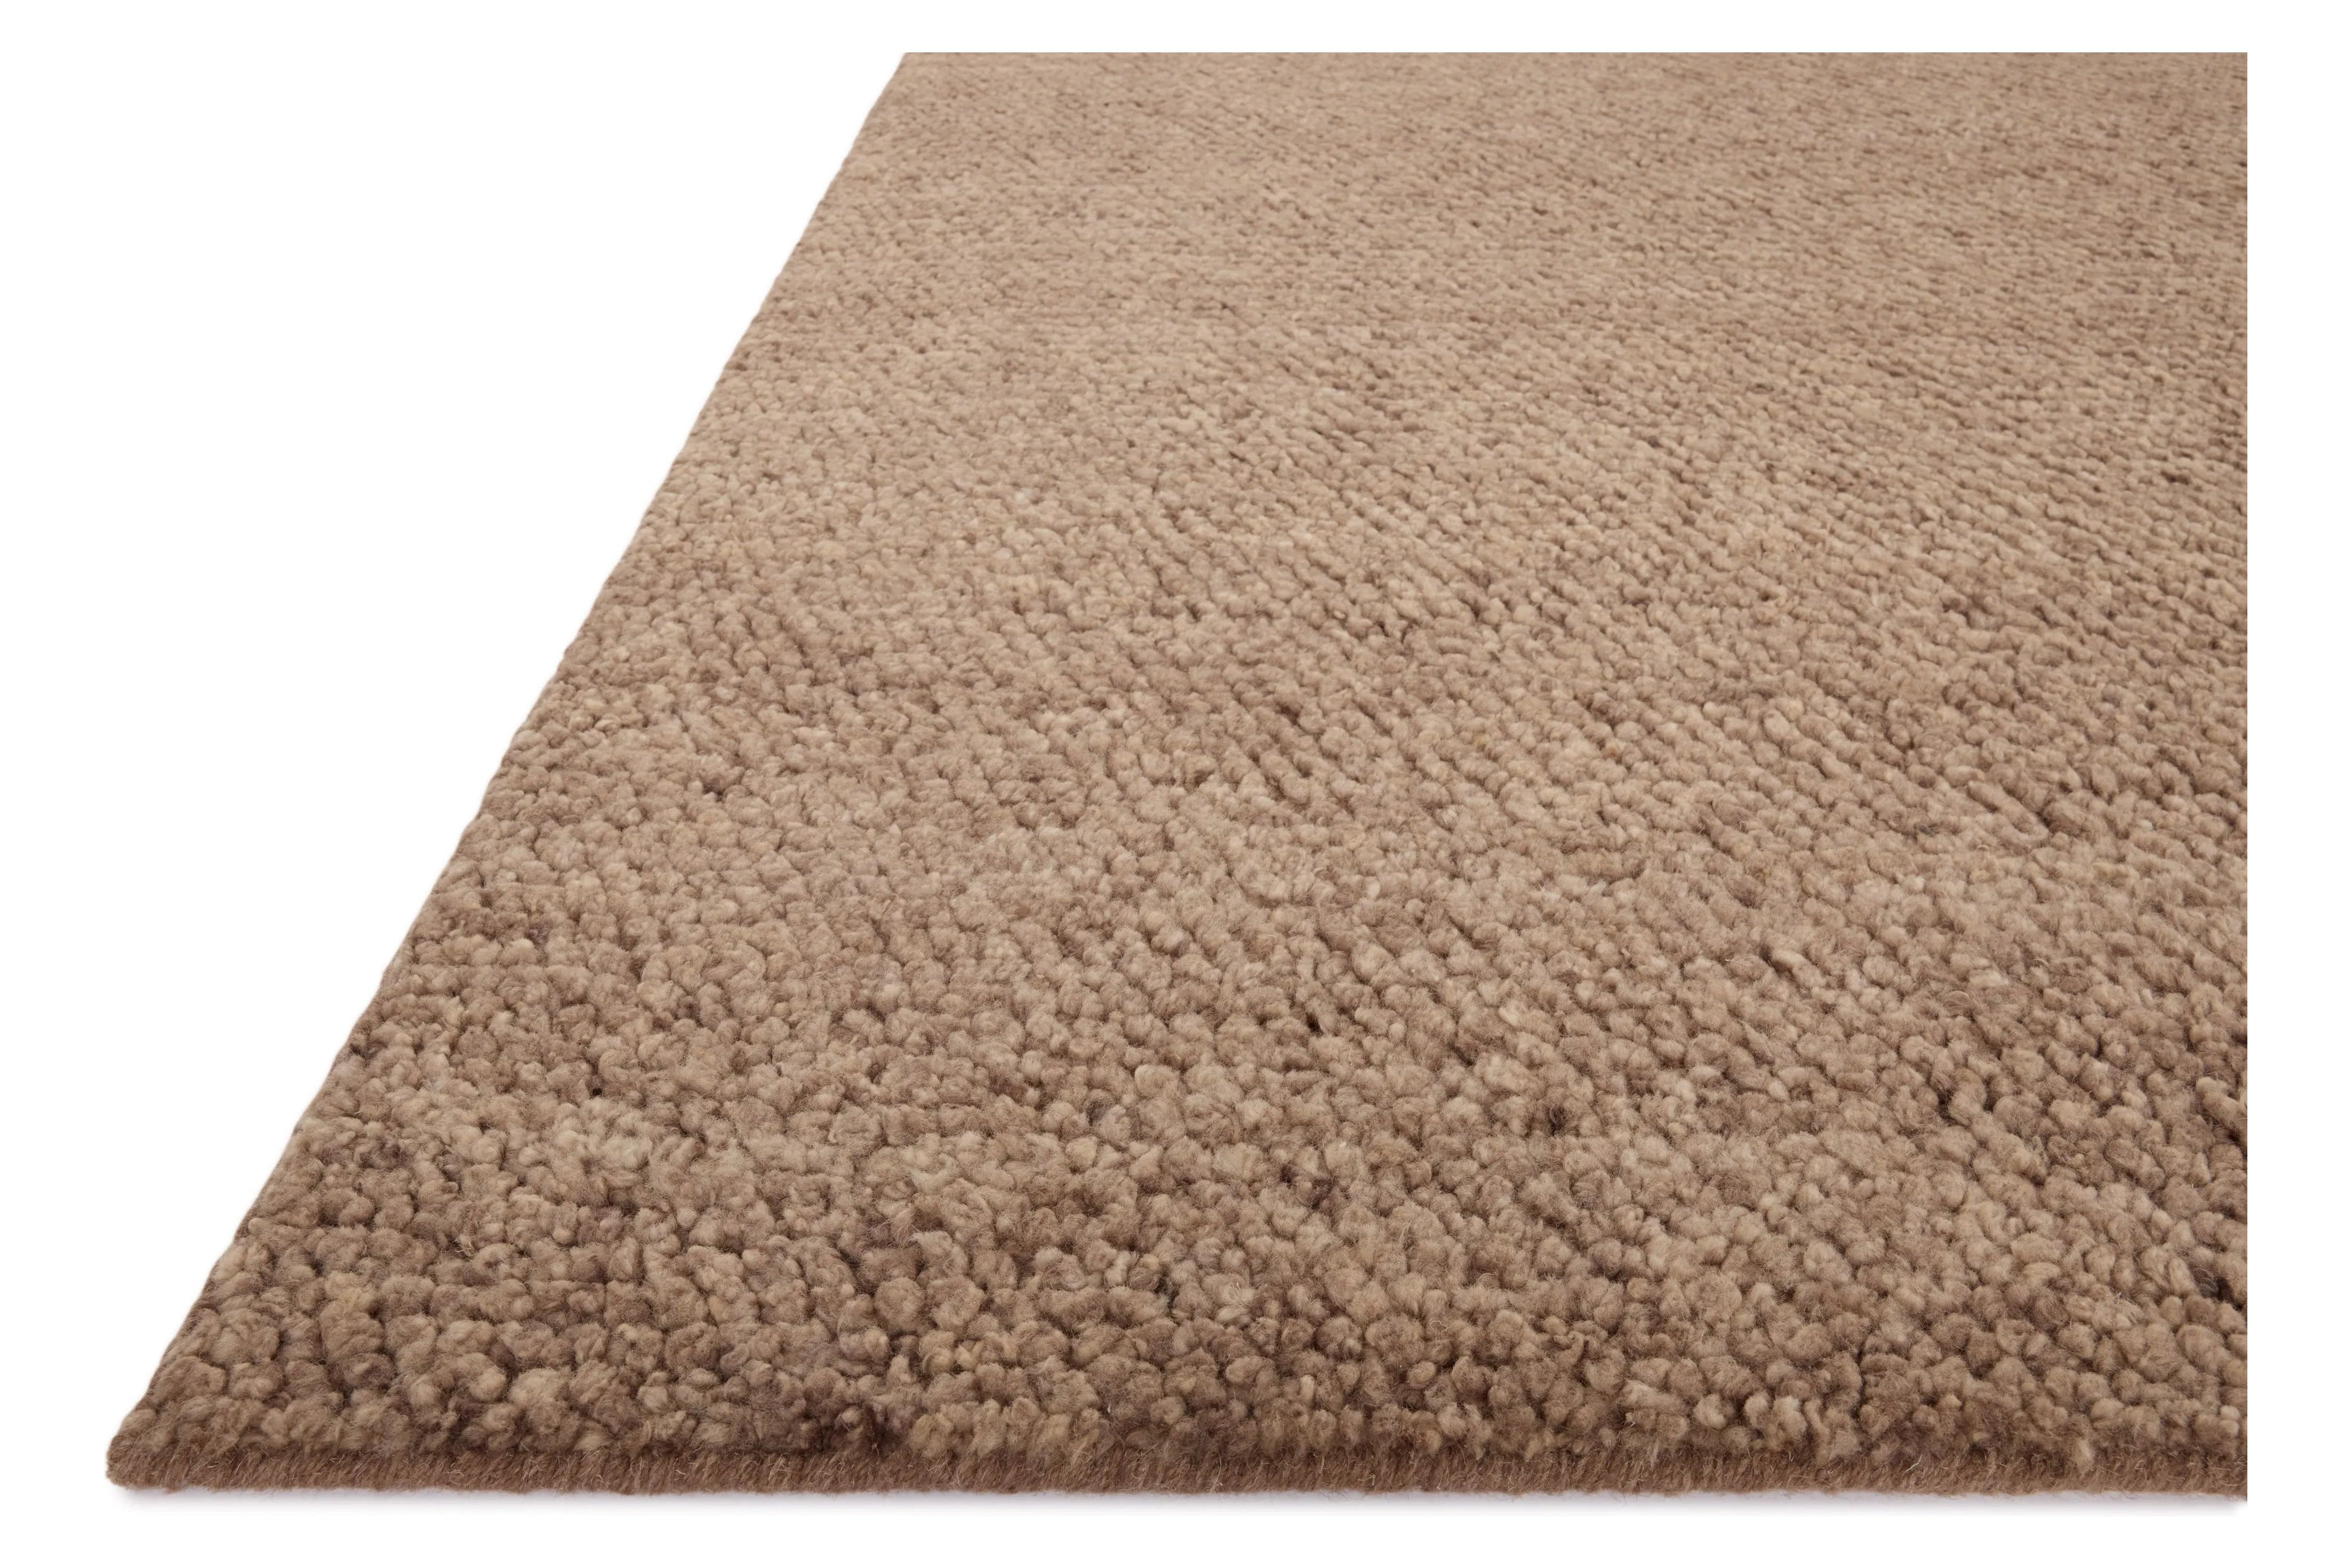 With versatile earth tones and a chunky, hand-knotted texture resembling tiny pebbles, the Frida Dark Taupe Rug by Brigette Romanek x Loloi can ground any room with a sense of elevated ease. Each area rug features a subtle nuance in color variation due to the handmade nature of its construction and has a pleasantly nubby softness underfoot. Amethyst Home provides interior design, new home construction design consulting, vintage area rugs, and lighting in the Scottsdale metro area.